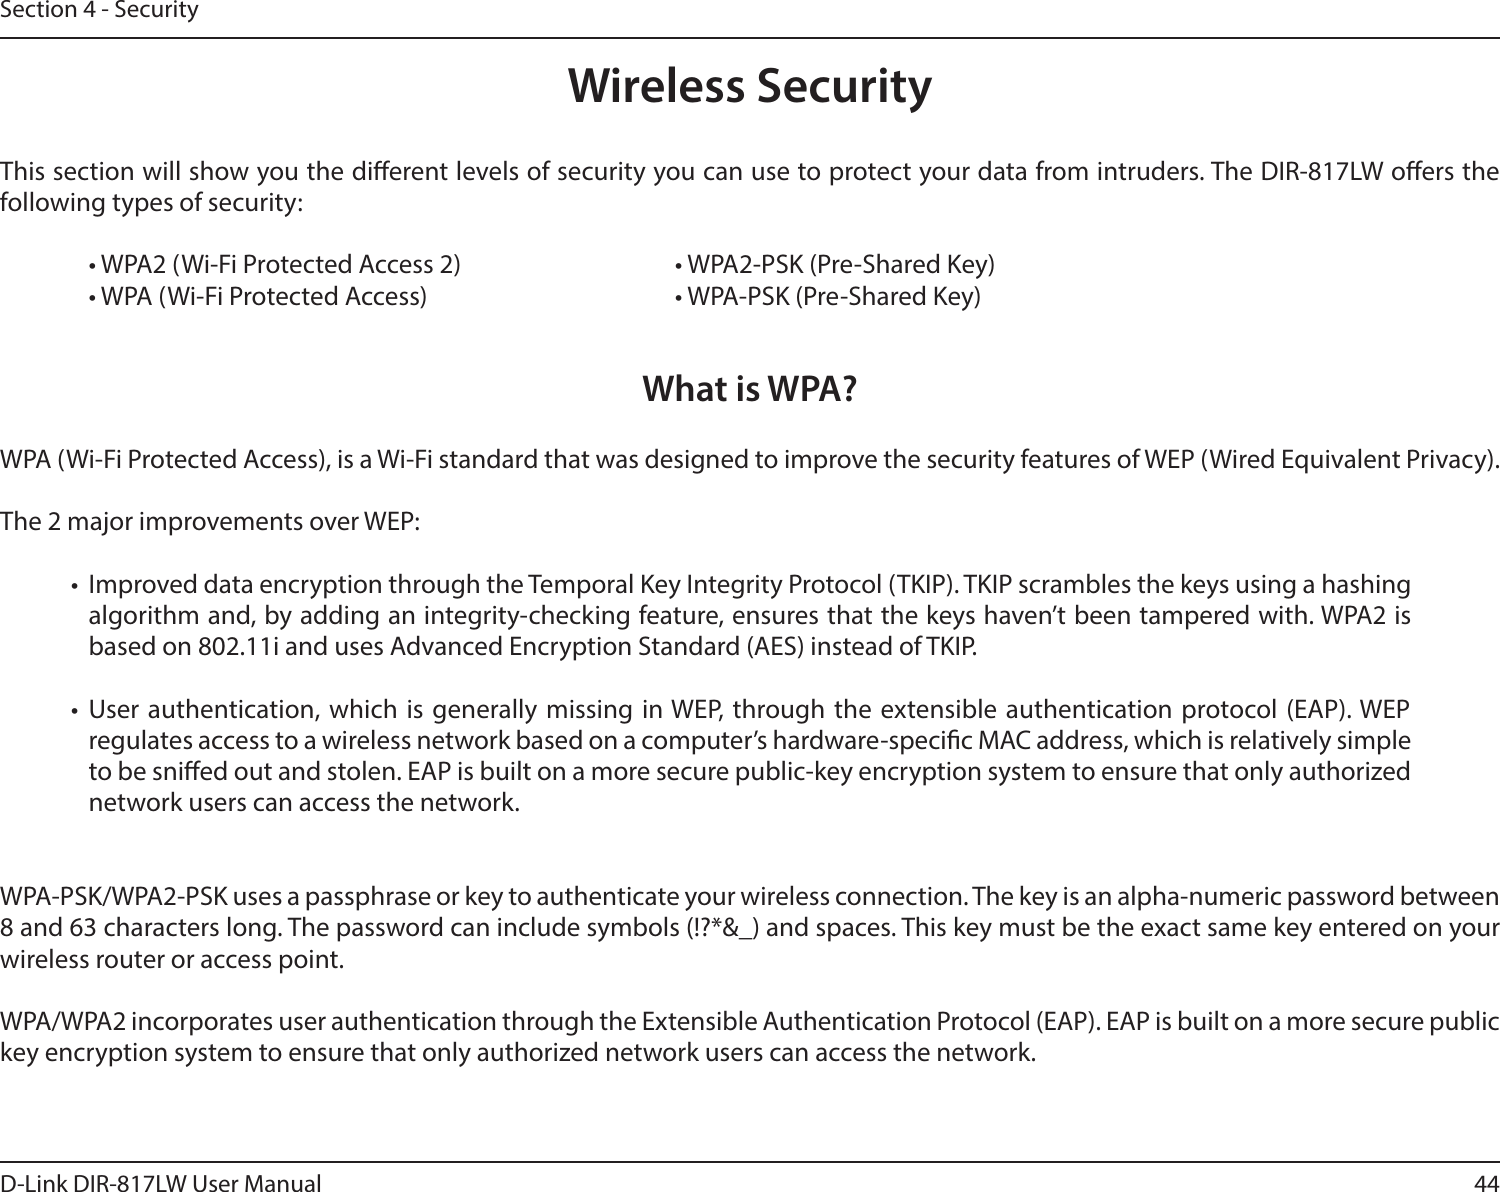 44D-Link DIR-817LW User ManualSection 4 - SecurityWireless SecurityThis section will show you the dierent levels of security you can use to protect your data from intruders. The DIR-817LW oers the following types of security:  • WPA2 (Wi-Fi Protected Access 2)       • WPA2-PSK (Pre-Shared Key)  • WPA (Wi-Fi Protected Access)        • WPA-PSK (Pre-Shared Key)What is WPA?WPA (Wi-Fi Protected Access), is a Wi-Fi standard that was designed to improve the security features of WEP (Wired Equivalent Privacy).  The 2 major improvements over WEP: •  Improved data encryption through the Temporal Key Integrity Protocol (TKIP). TKIP scrambles the keys using a hashing algorithm and, by adding an integrity-checking feature, ensures that the keys haven’t been tampered with. WPA2 is based on 802.11i and uses Advanced Encryption Standard (AES) instead of TKIP.•  User authentication, which  is generally missing in WEP, through the extensible authentication protocol (EAP). WEP regulates access to a wireless network based on a computer’s hardware-specic MAC address, which is relatively simple to be snied out and stolen. EAP is built on a more secure public-key encryption system to ensure that only authorized network users can access the network.WPA-PSK/WPA2-PSK uses a passphrase or key to authenticate your wireless connection. The key is an alpha-numeric password between 8 and 63 characters long. The password can include symbols (!?*&amp;_) and spaces. This key must be the exact same key entered on your wireless router or access point.WPA/WPA2 incorporates user authentication through the Extensible Authentication Protocol (EAP). EAP is built on a more secure public key encryption system to ensure that only authorized network users can access the network.